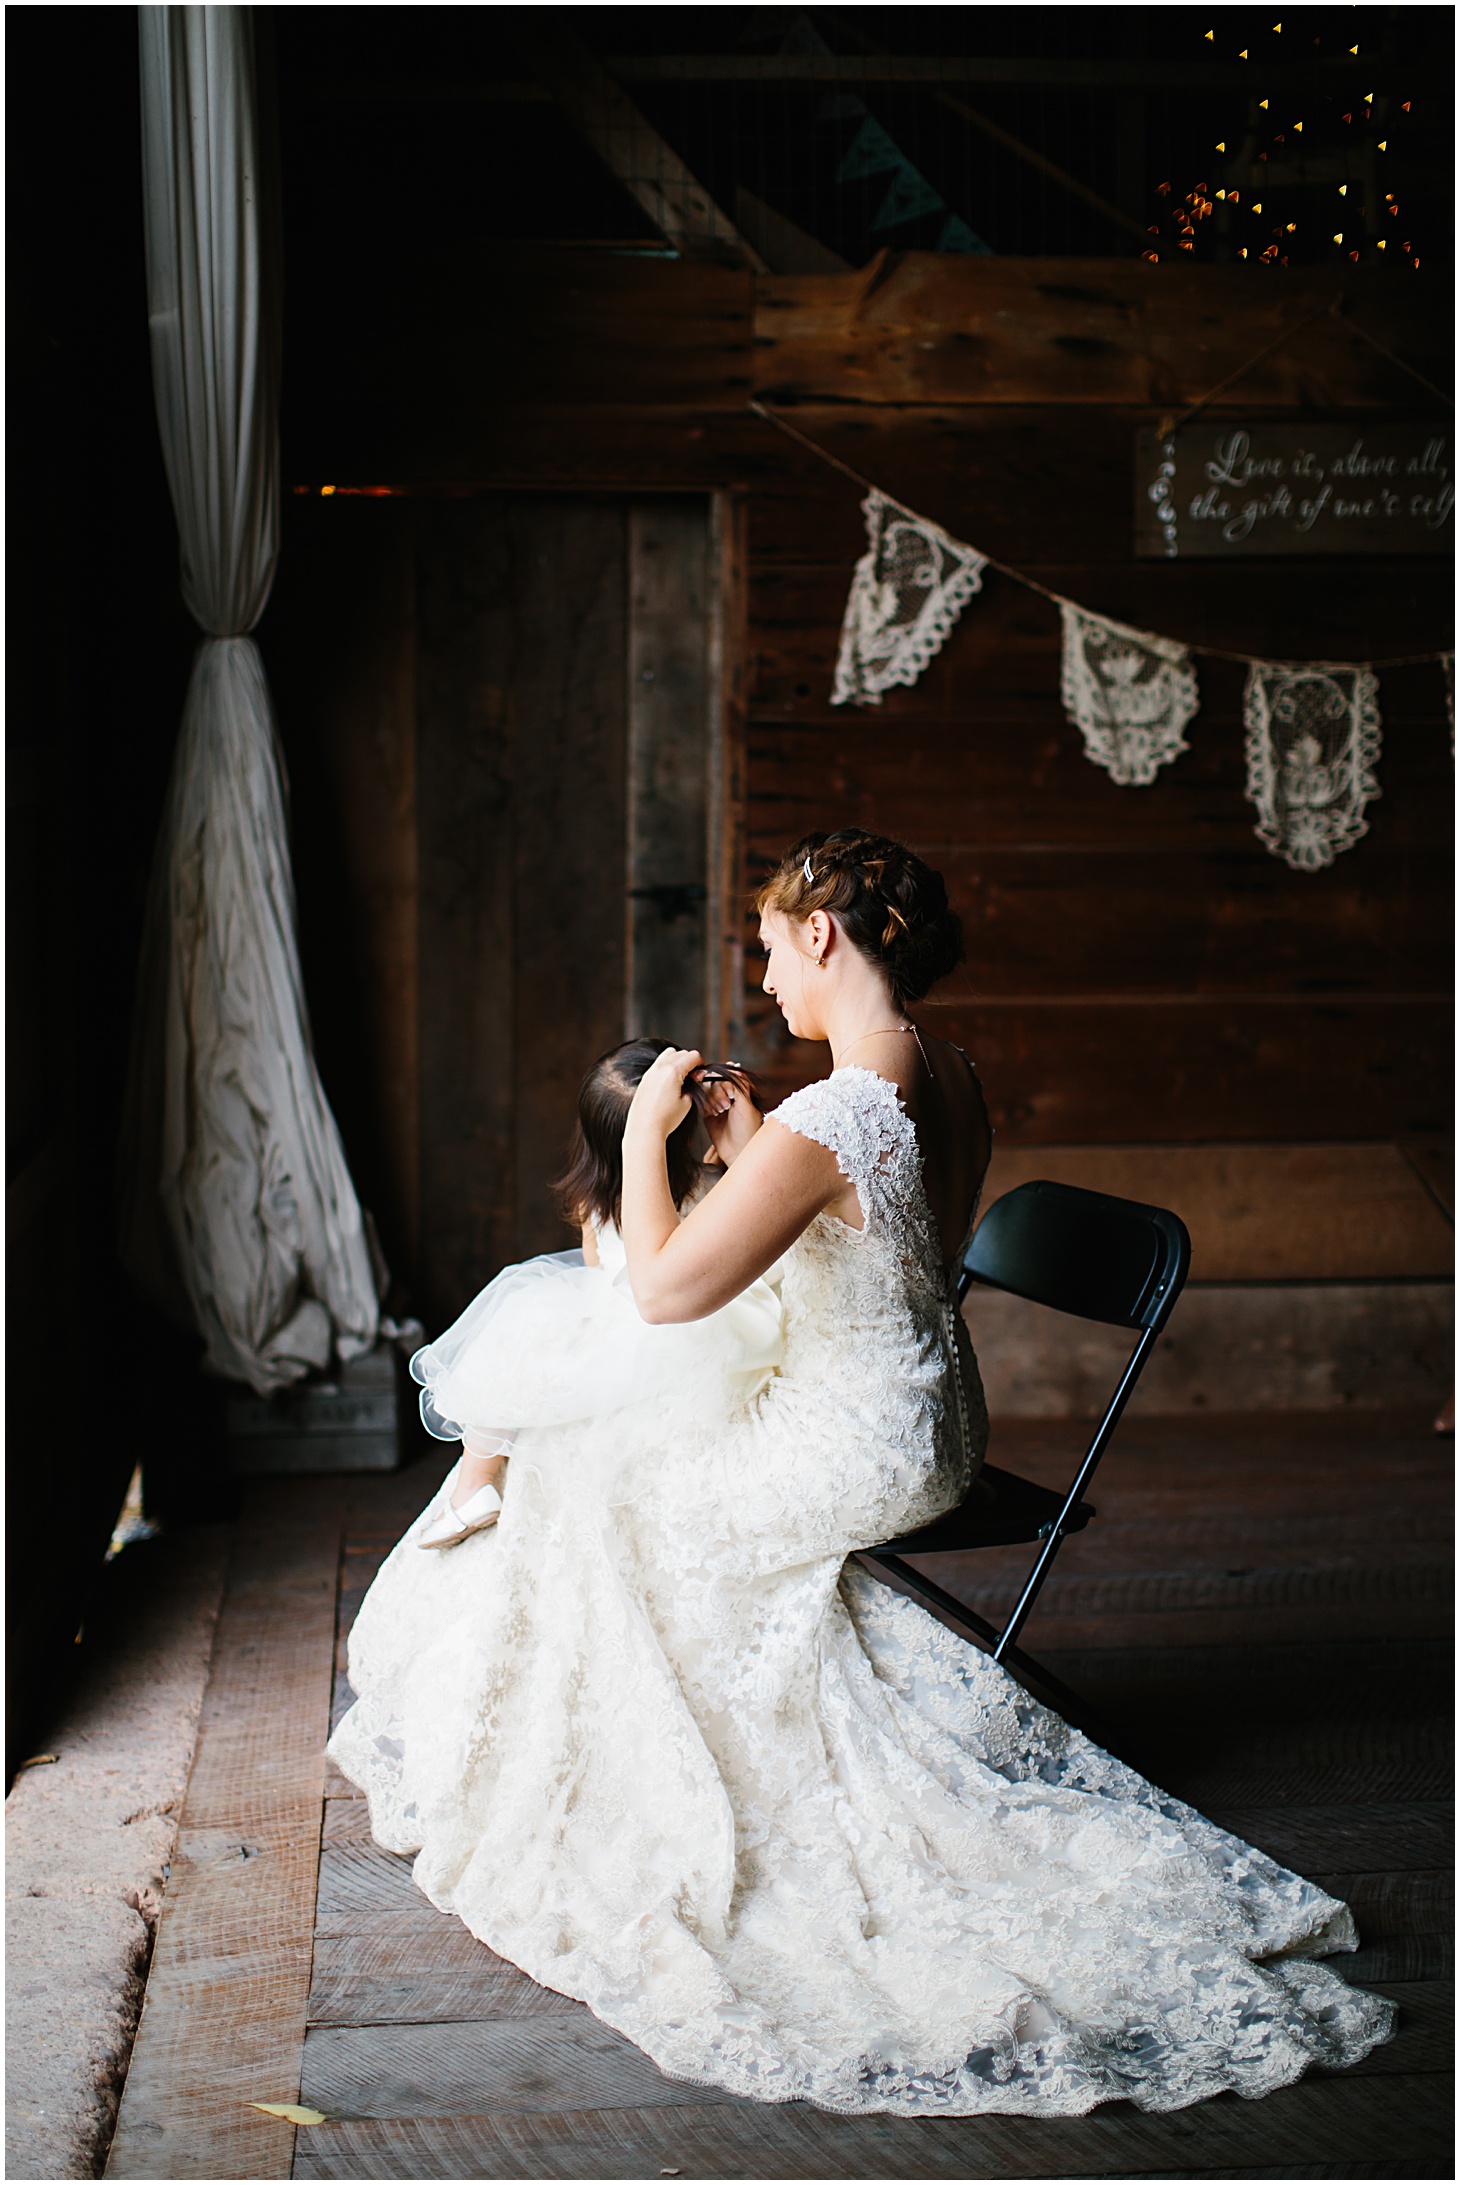 Rustic Floral Wedding at Rocklands Farm & Winery by Sarah Bradshaw Photography_0013